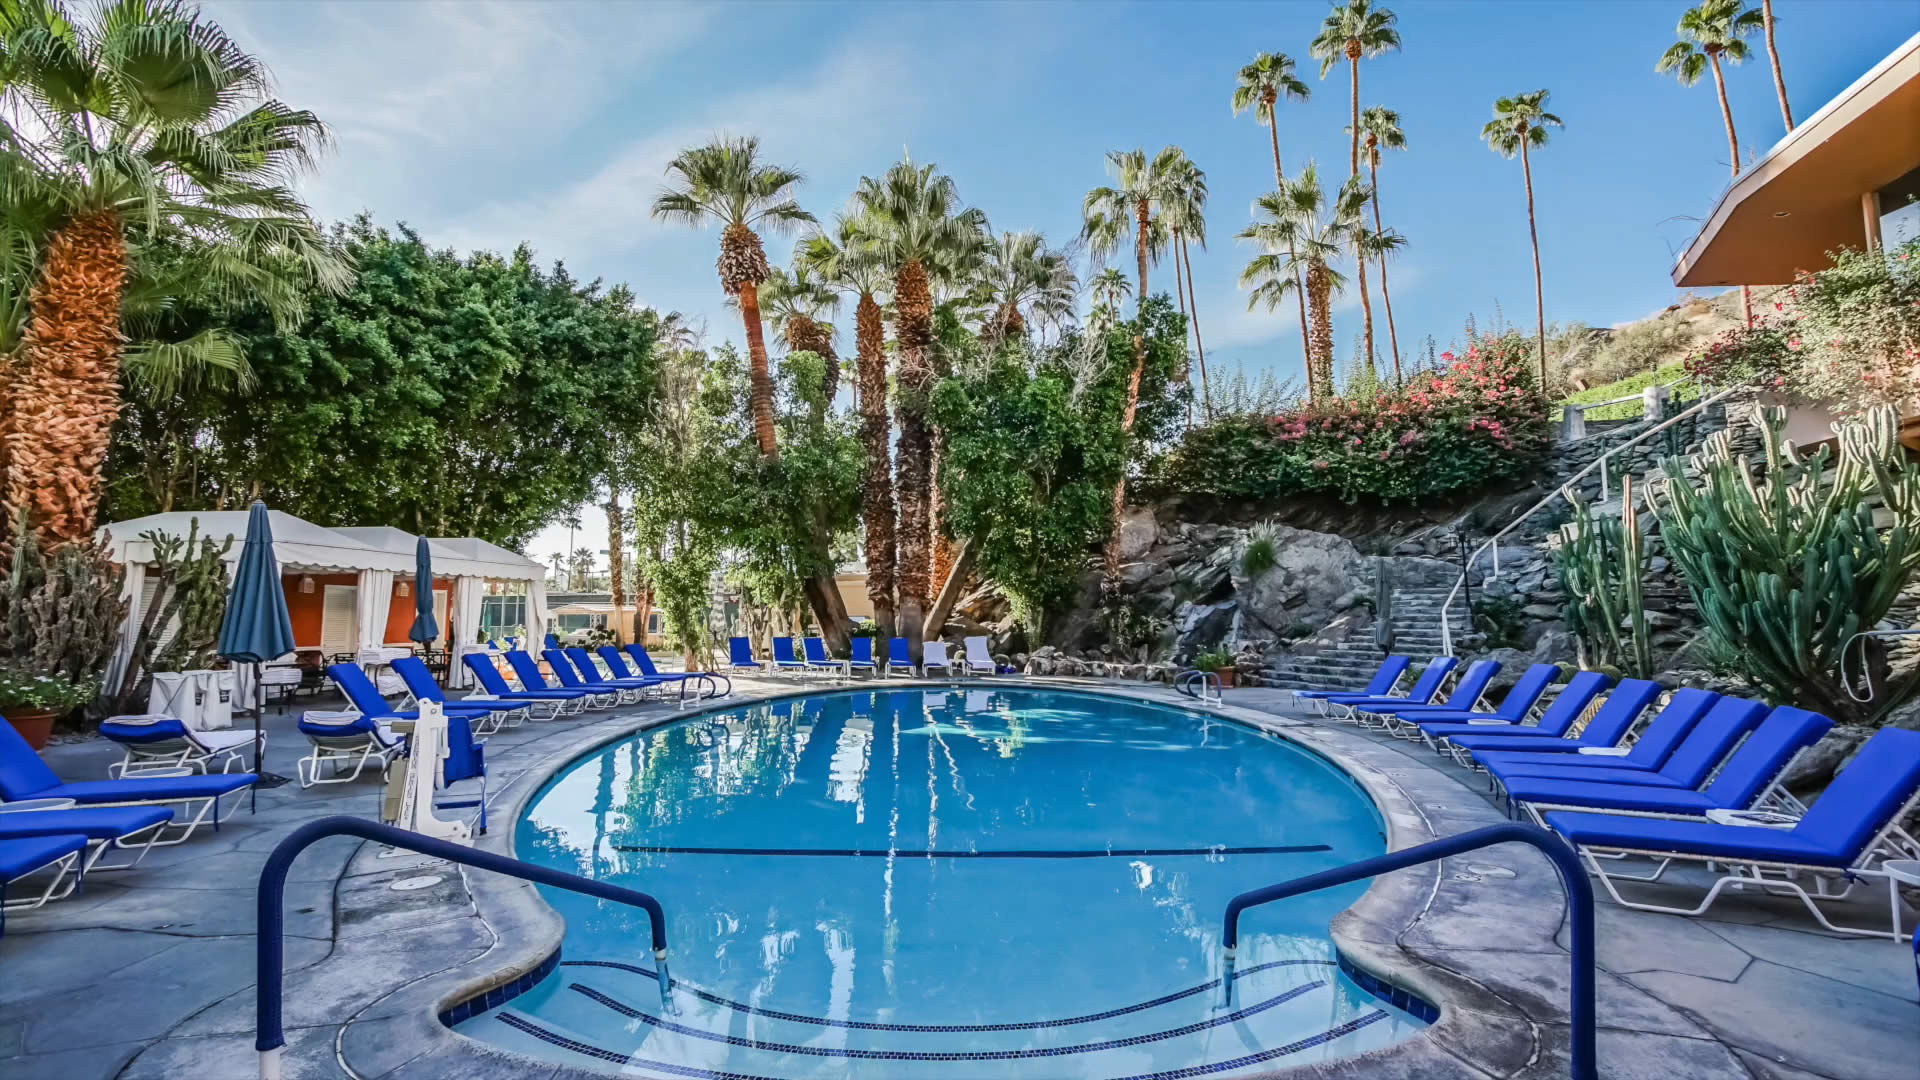 Photo of Swimming Area surrounded by blue chairs, cabanas and palm trees